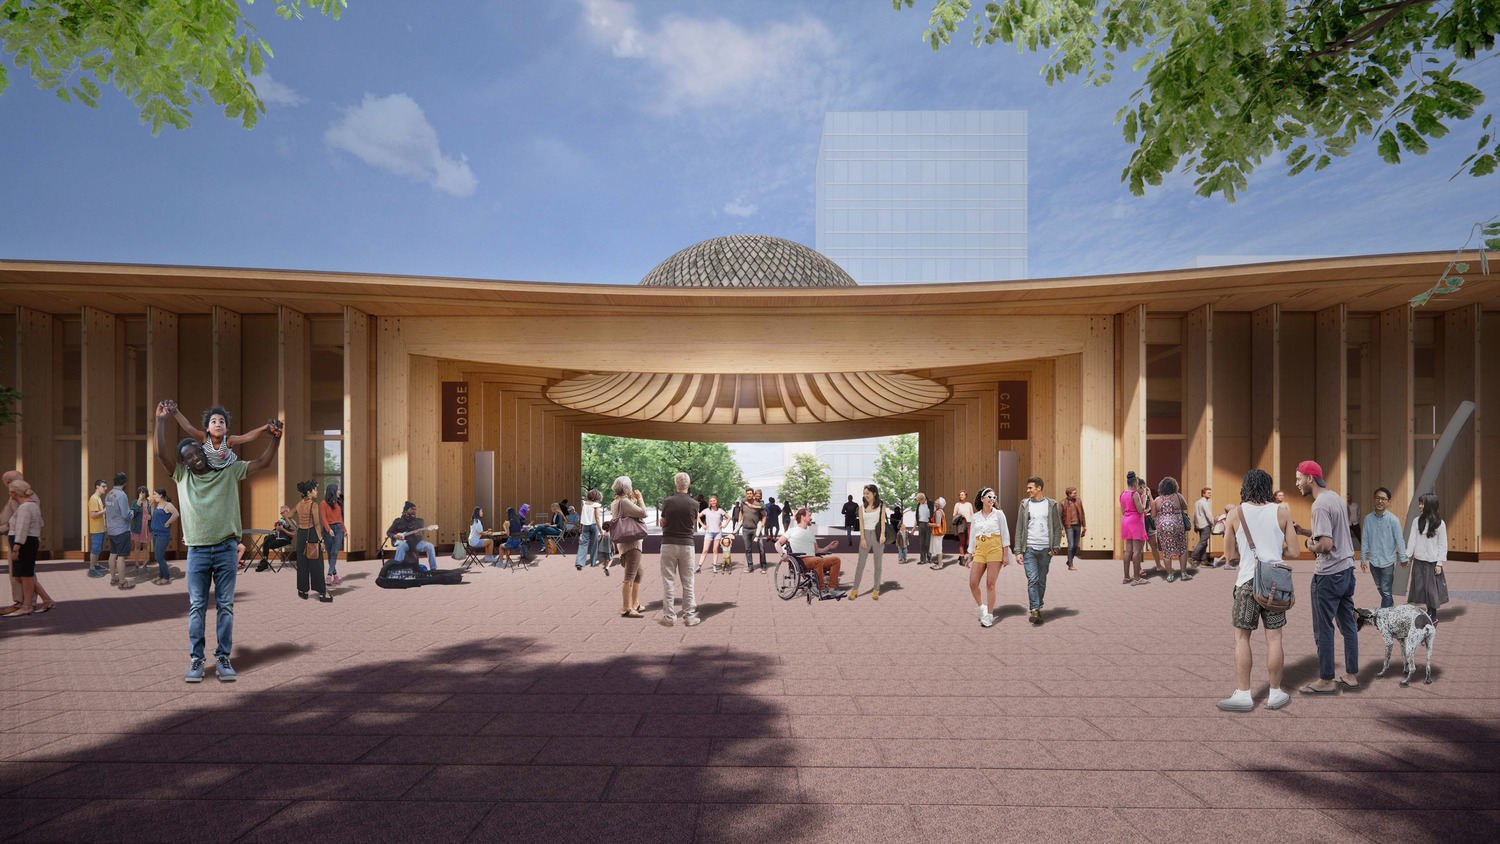 <p>The structures are joined together by a covered open-air breezeway, creating additional programmable space with immediate adjacency to both the pavilion and café.&nbsp;<br /><br><small>&copy; KieranTimberlake</small></p>